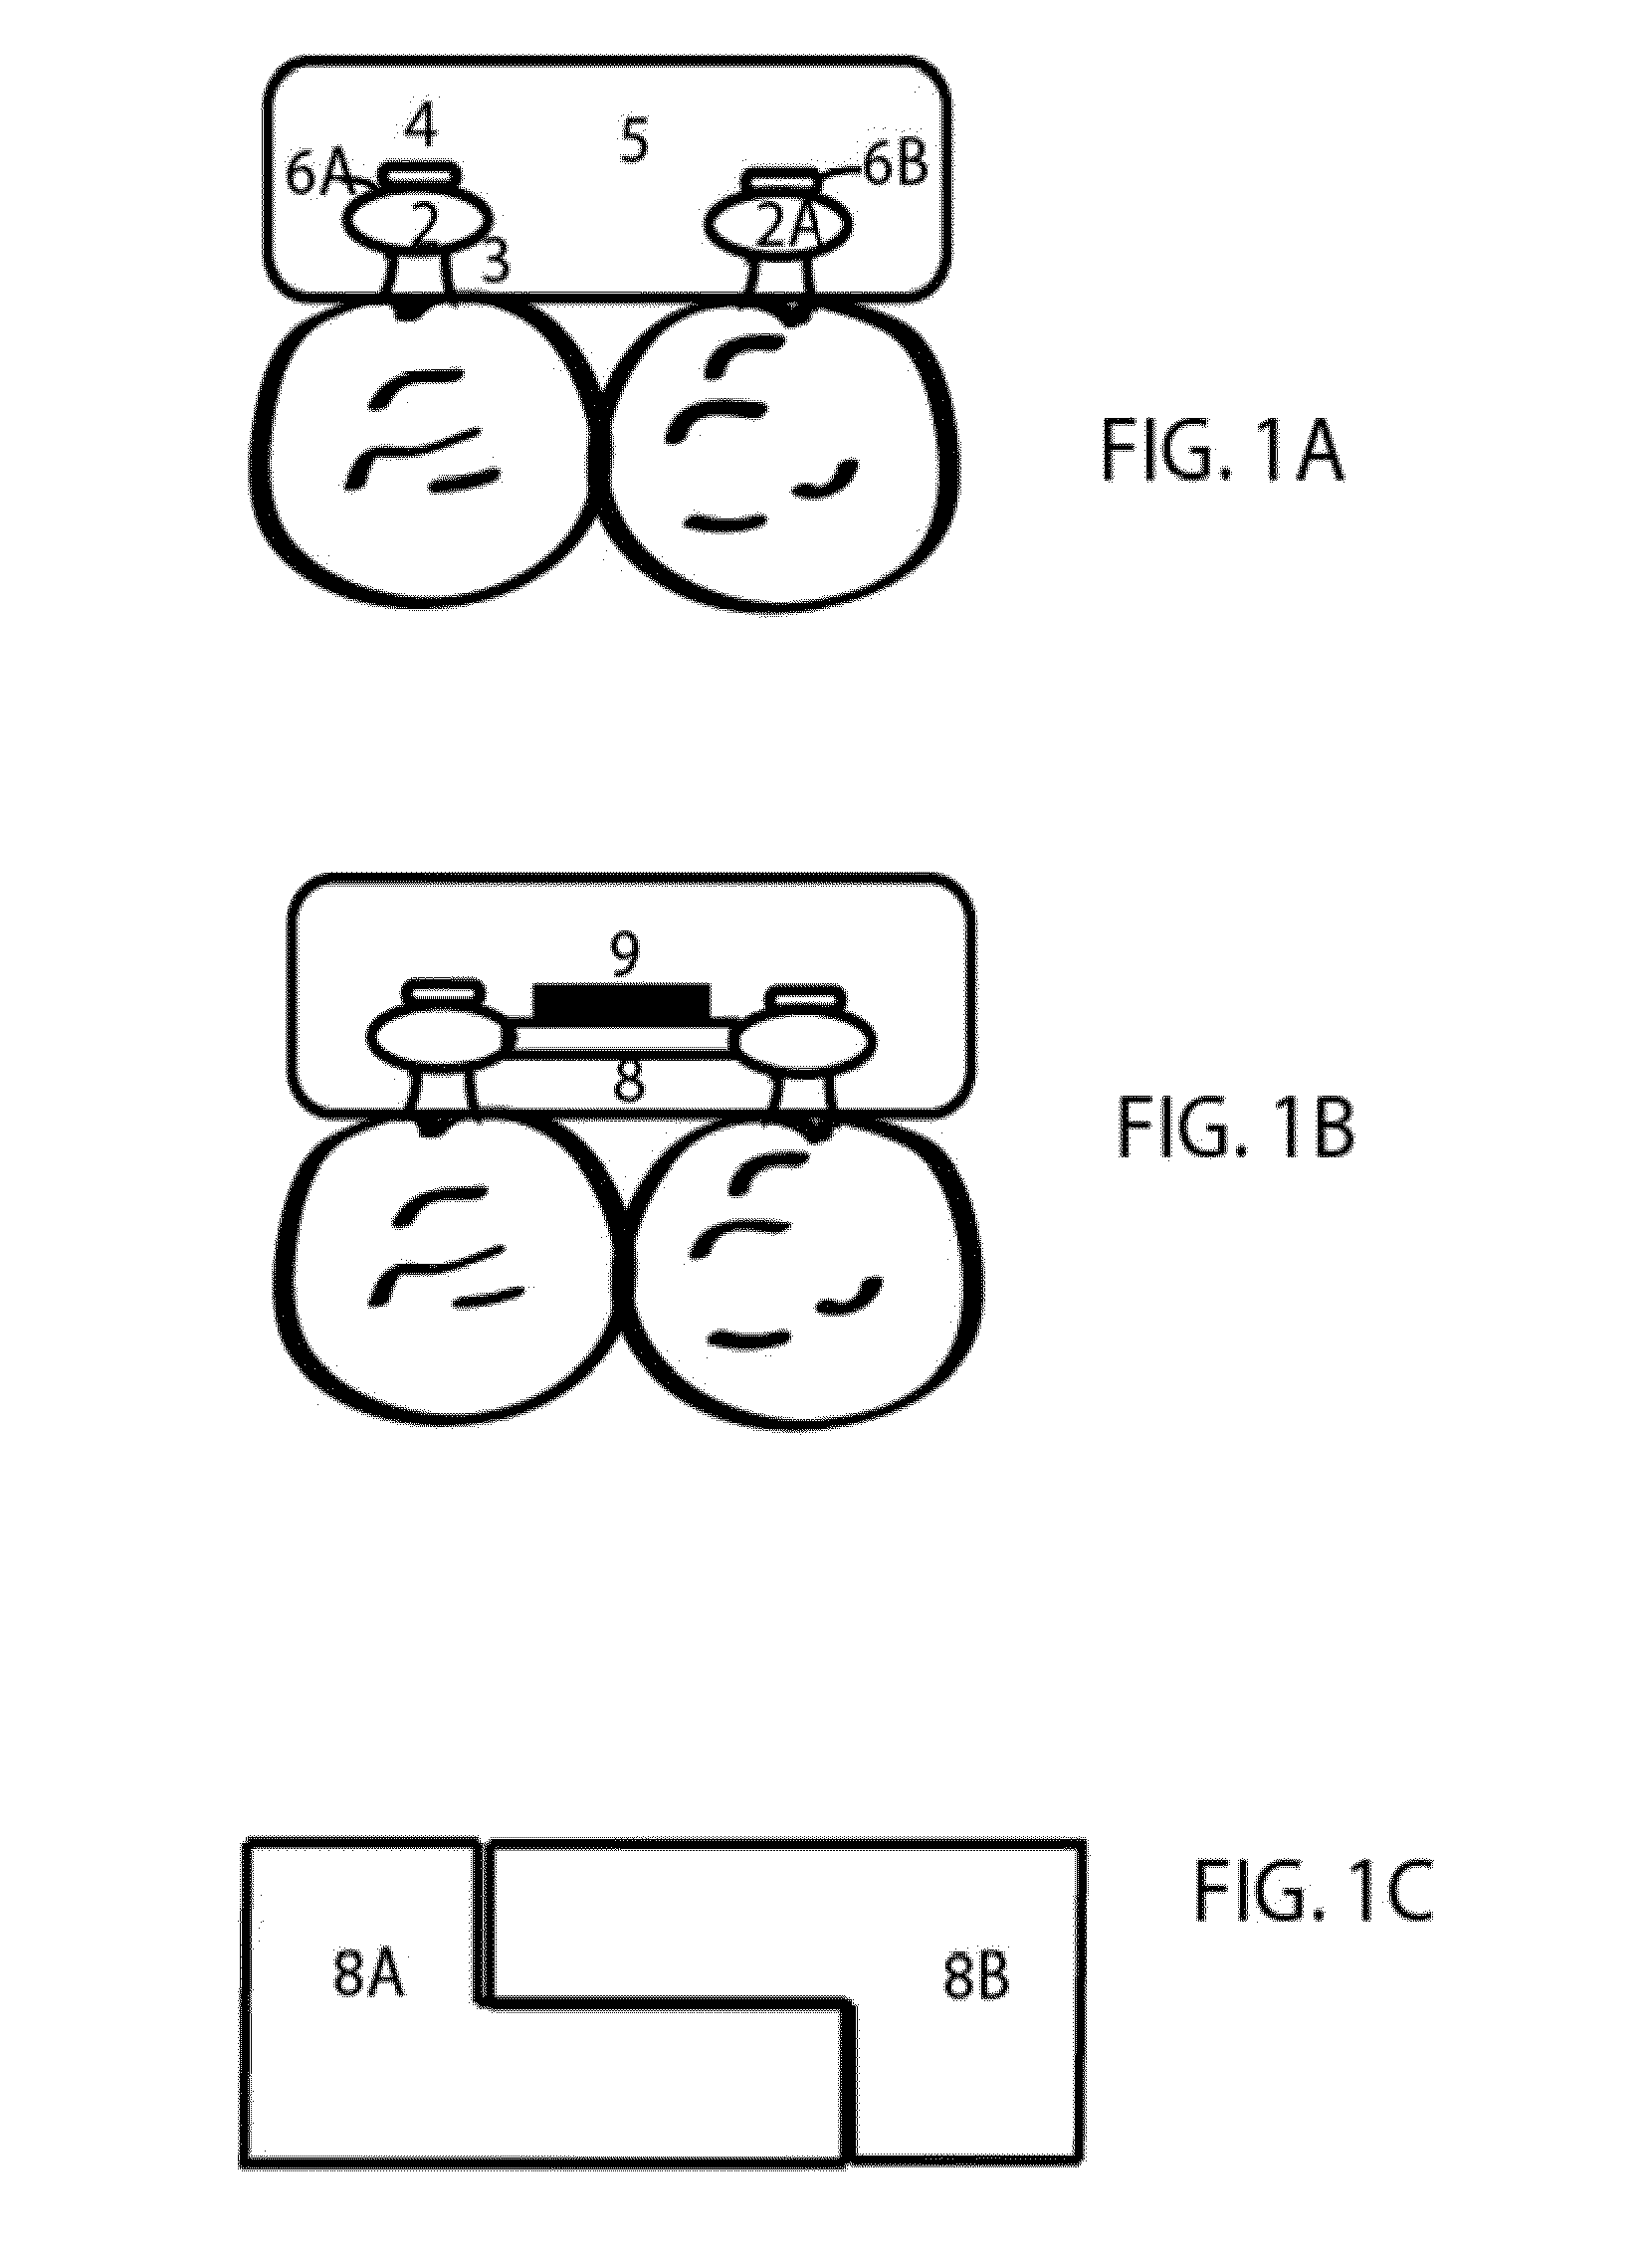 Intra-oral brackets for transmitting vibrations